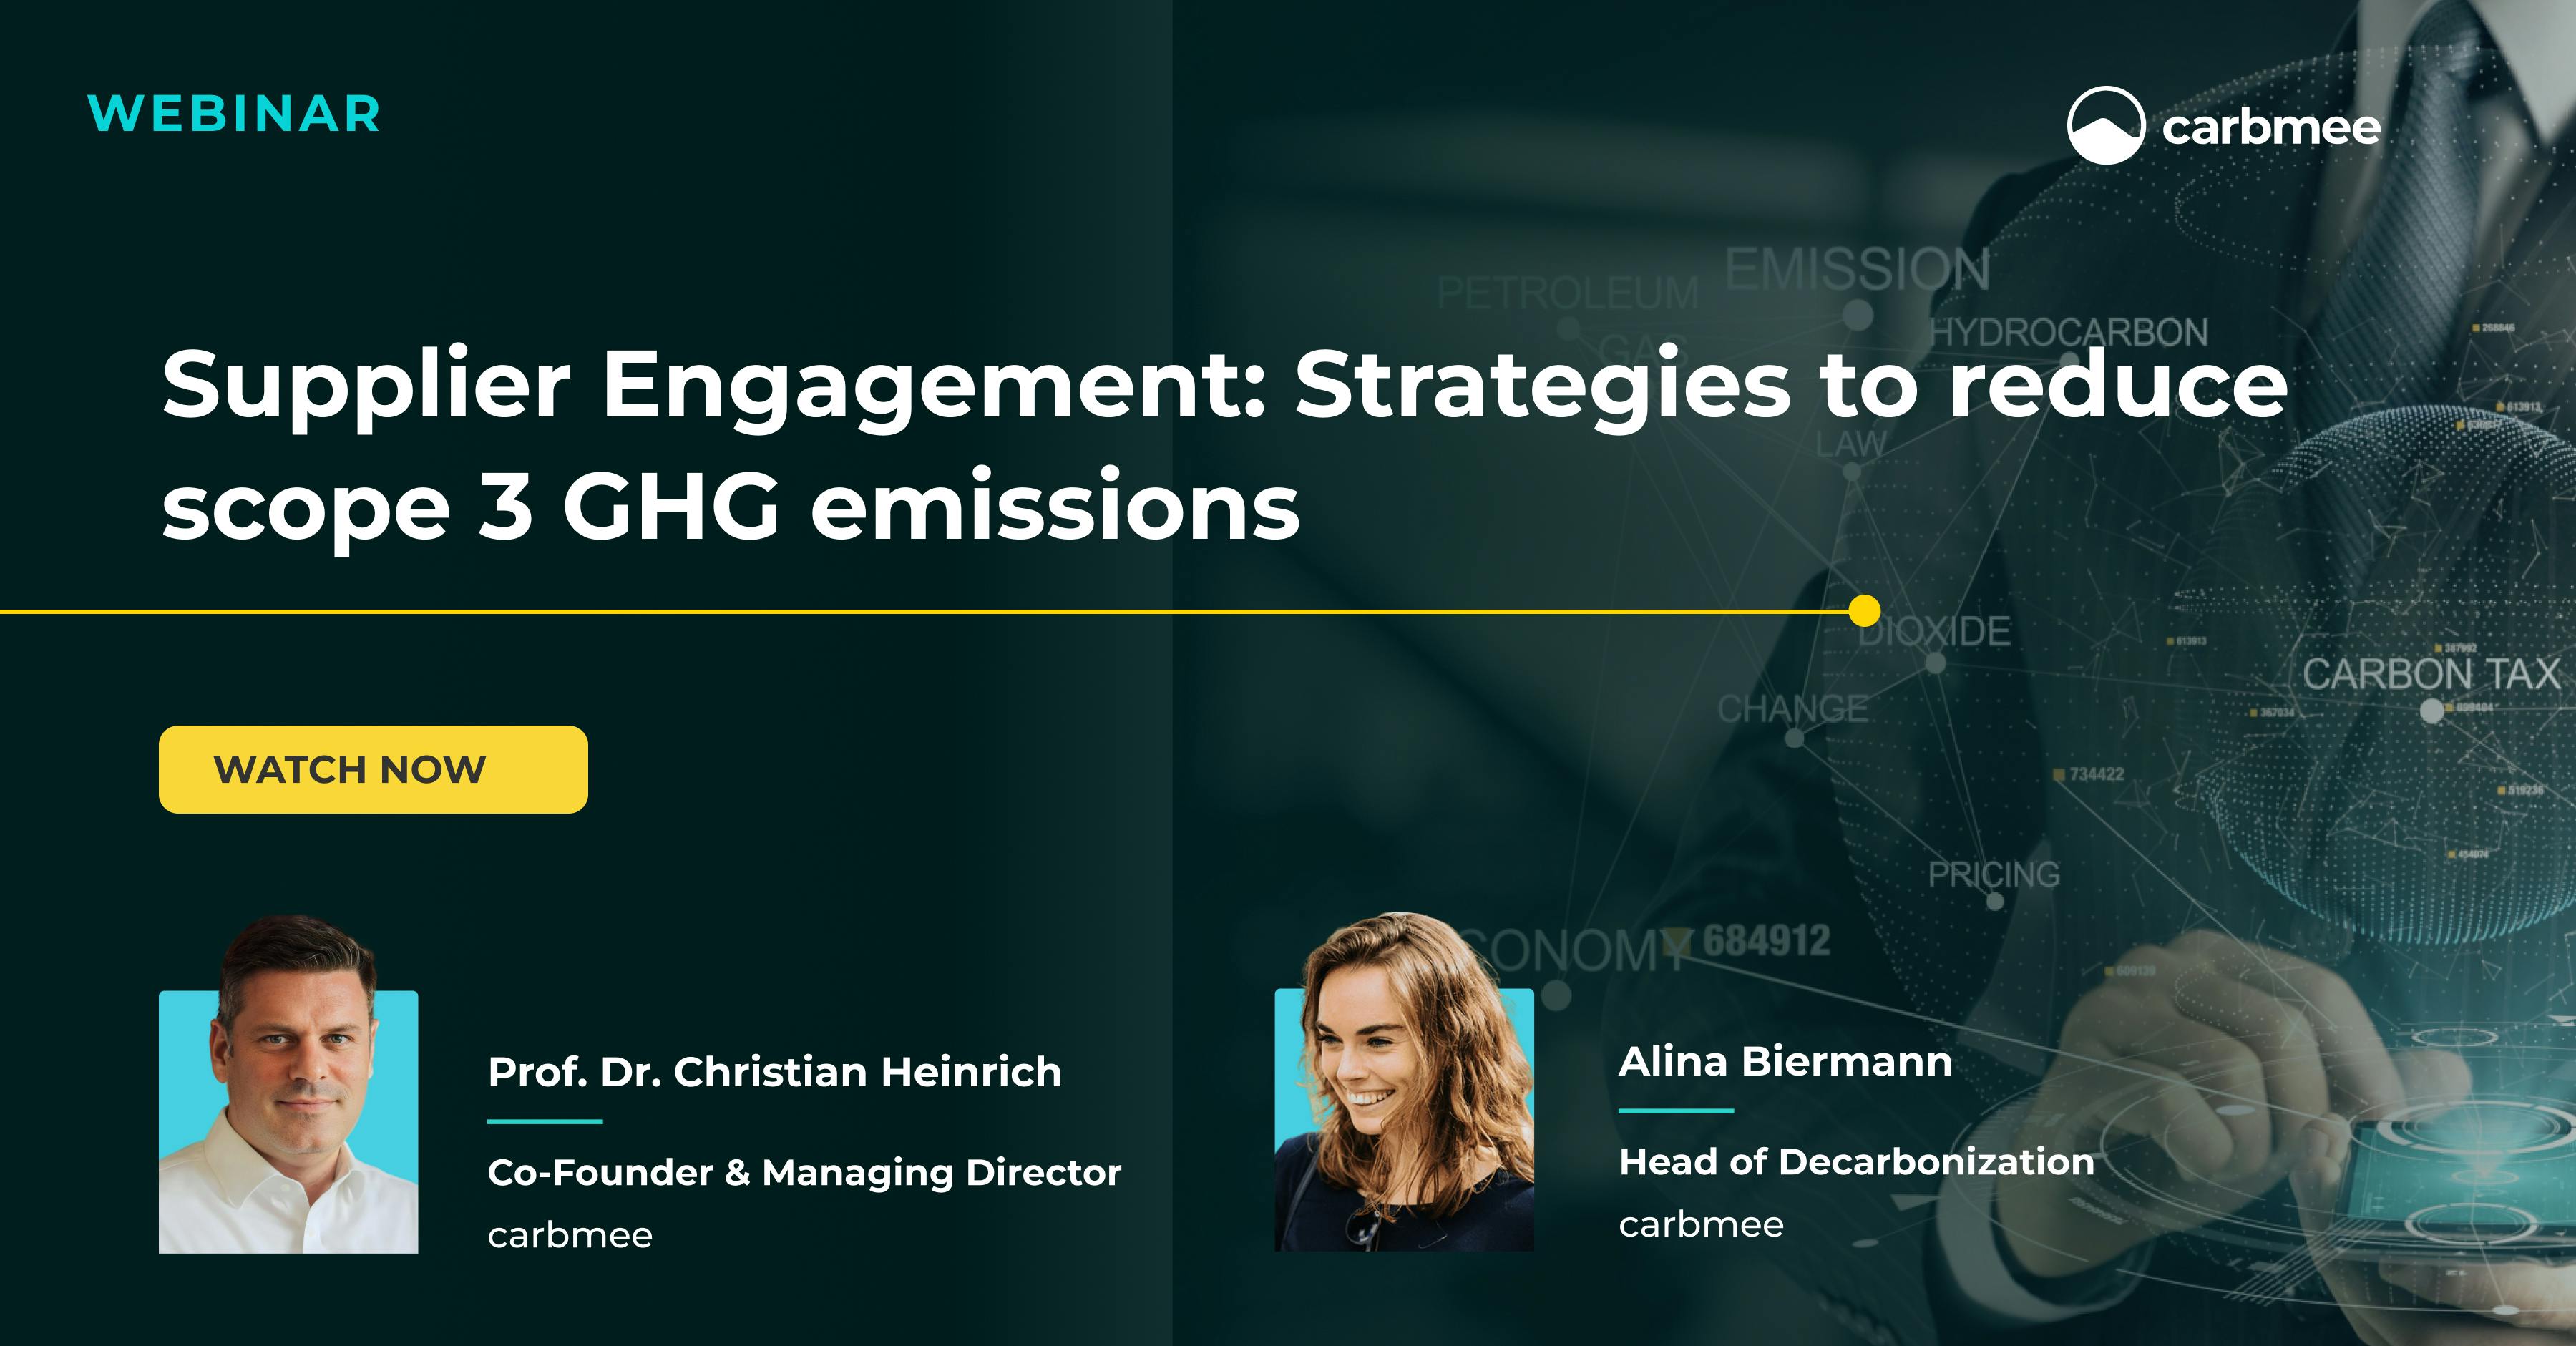 Supplier Engagement: Strategies to reduce scope 3 GHG emissions